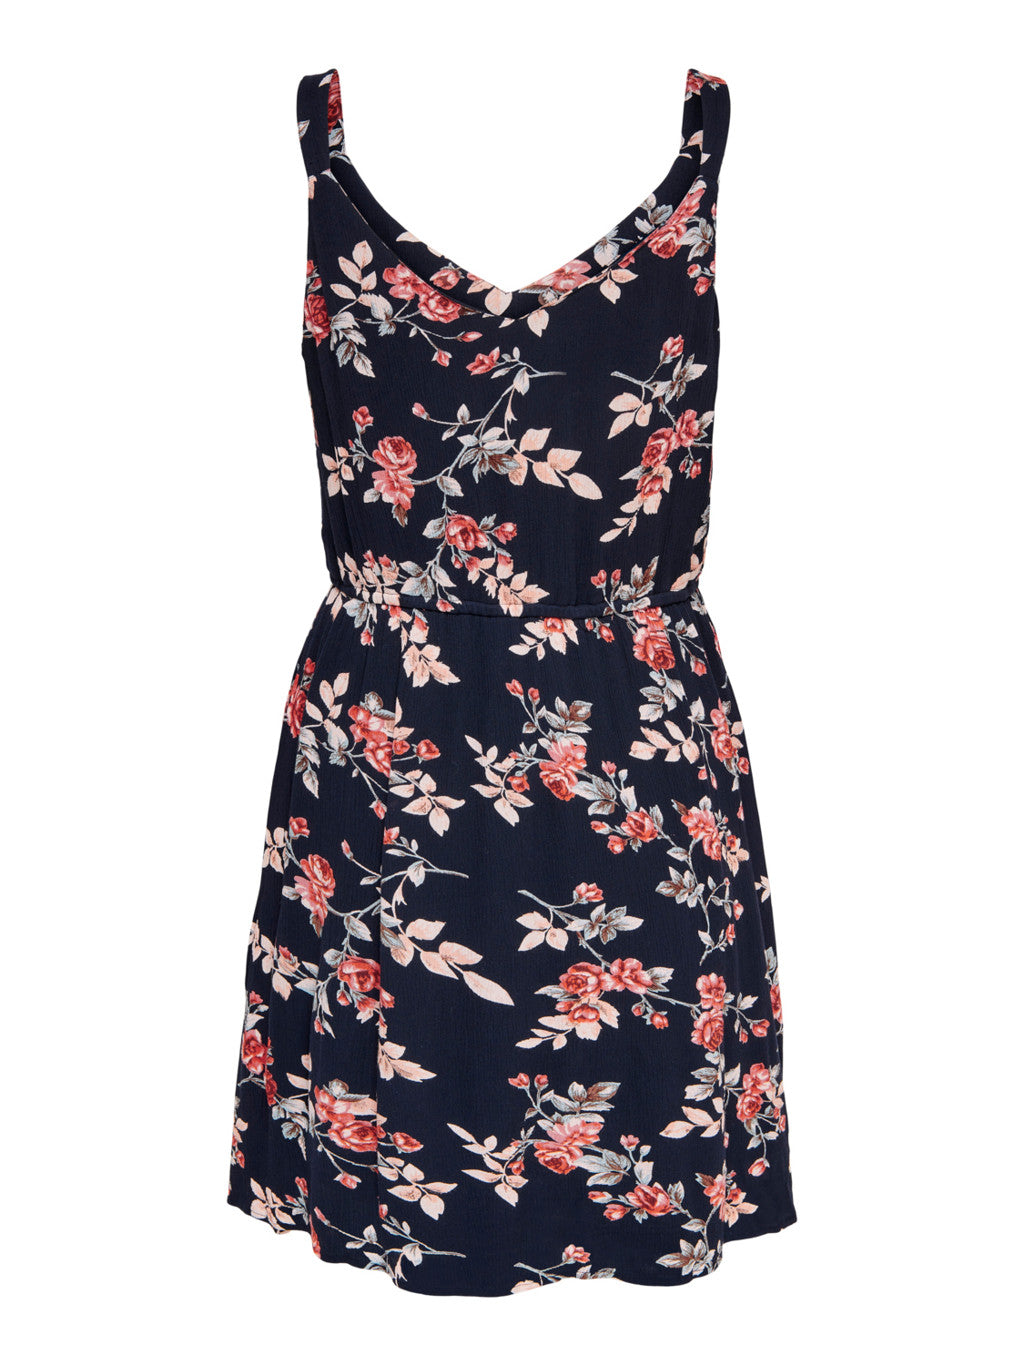 Women's ONLY navy Floral Dress